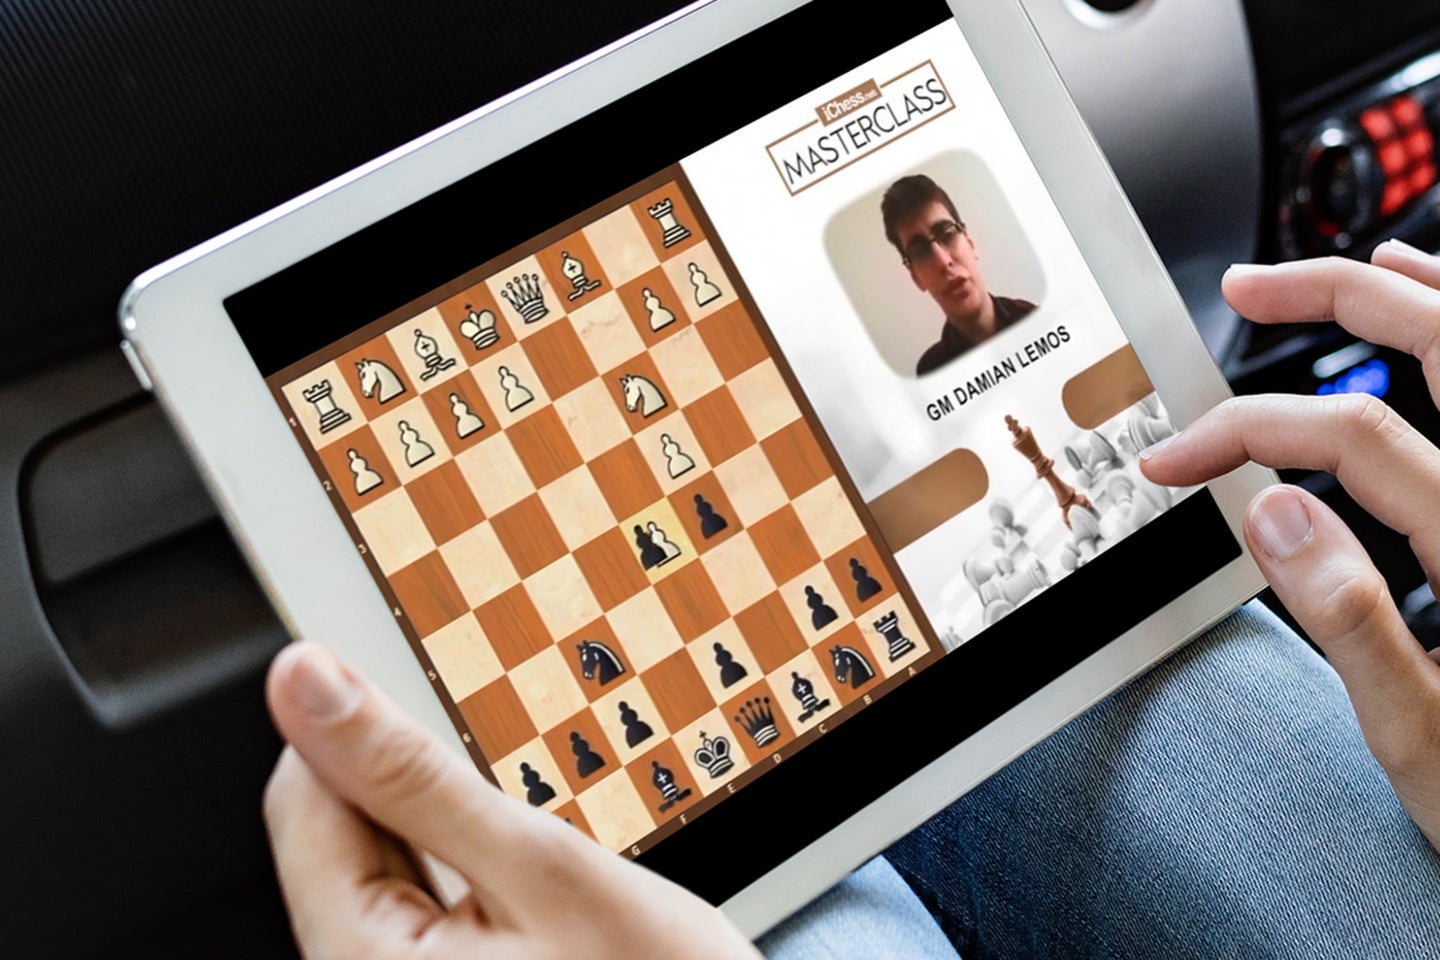 A person playing chess on an iPad